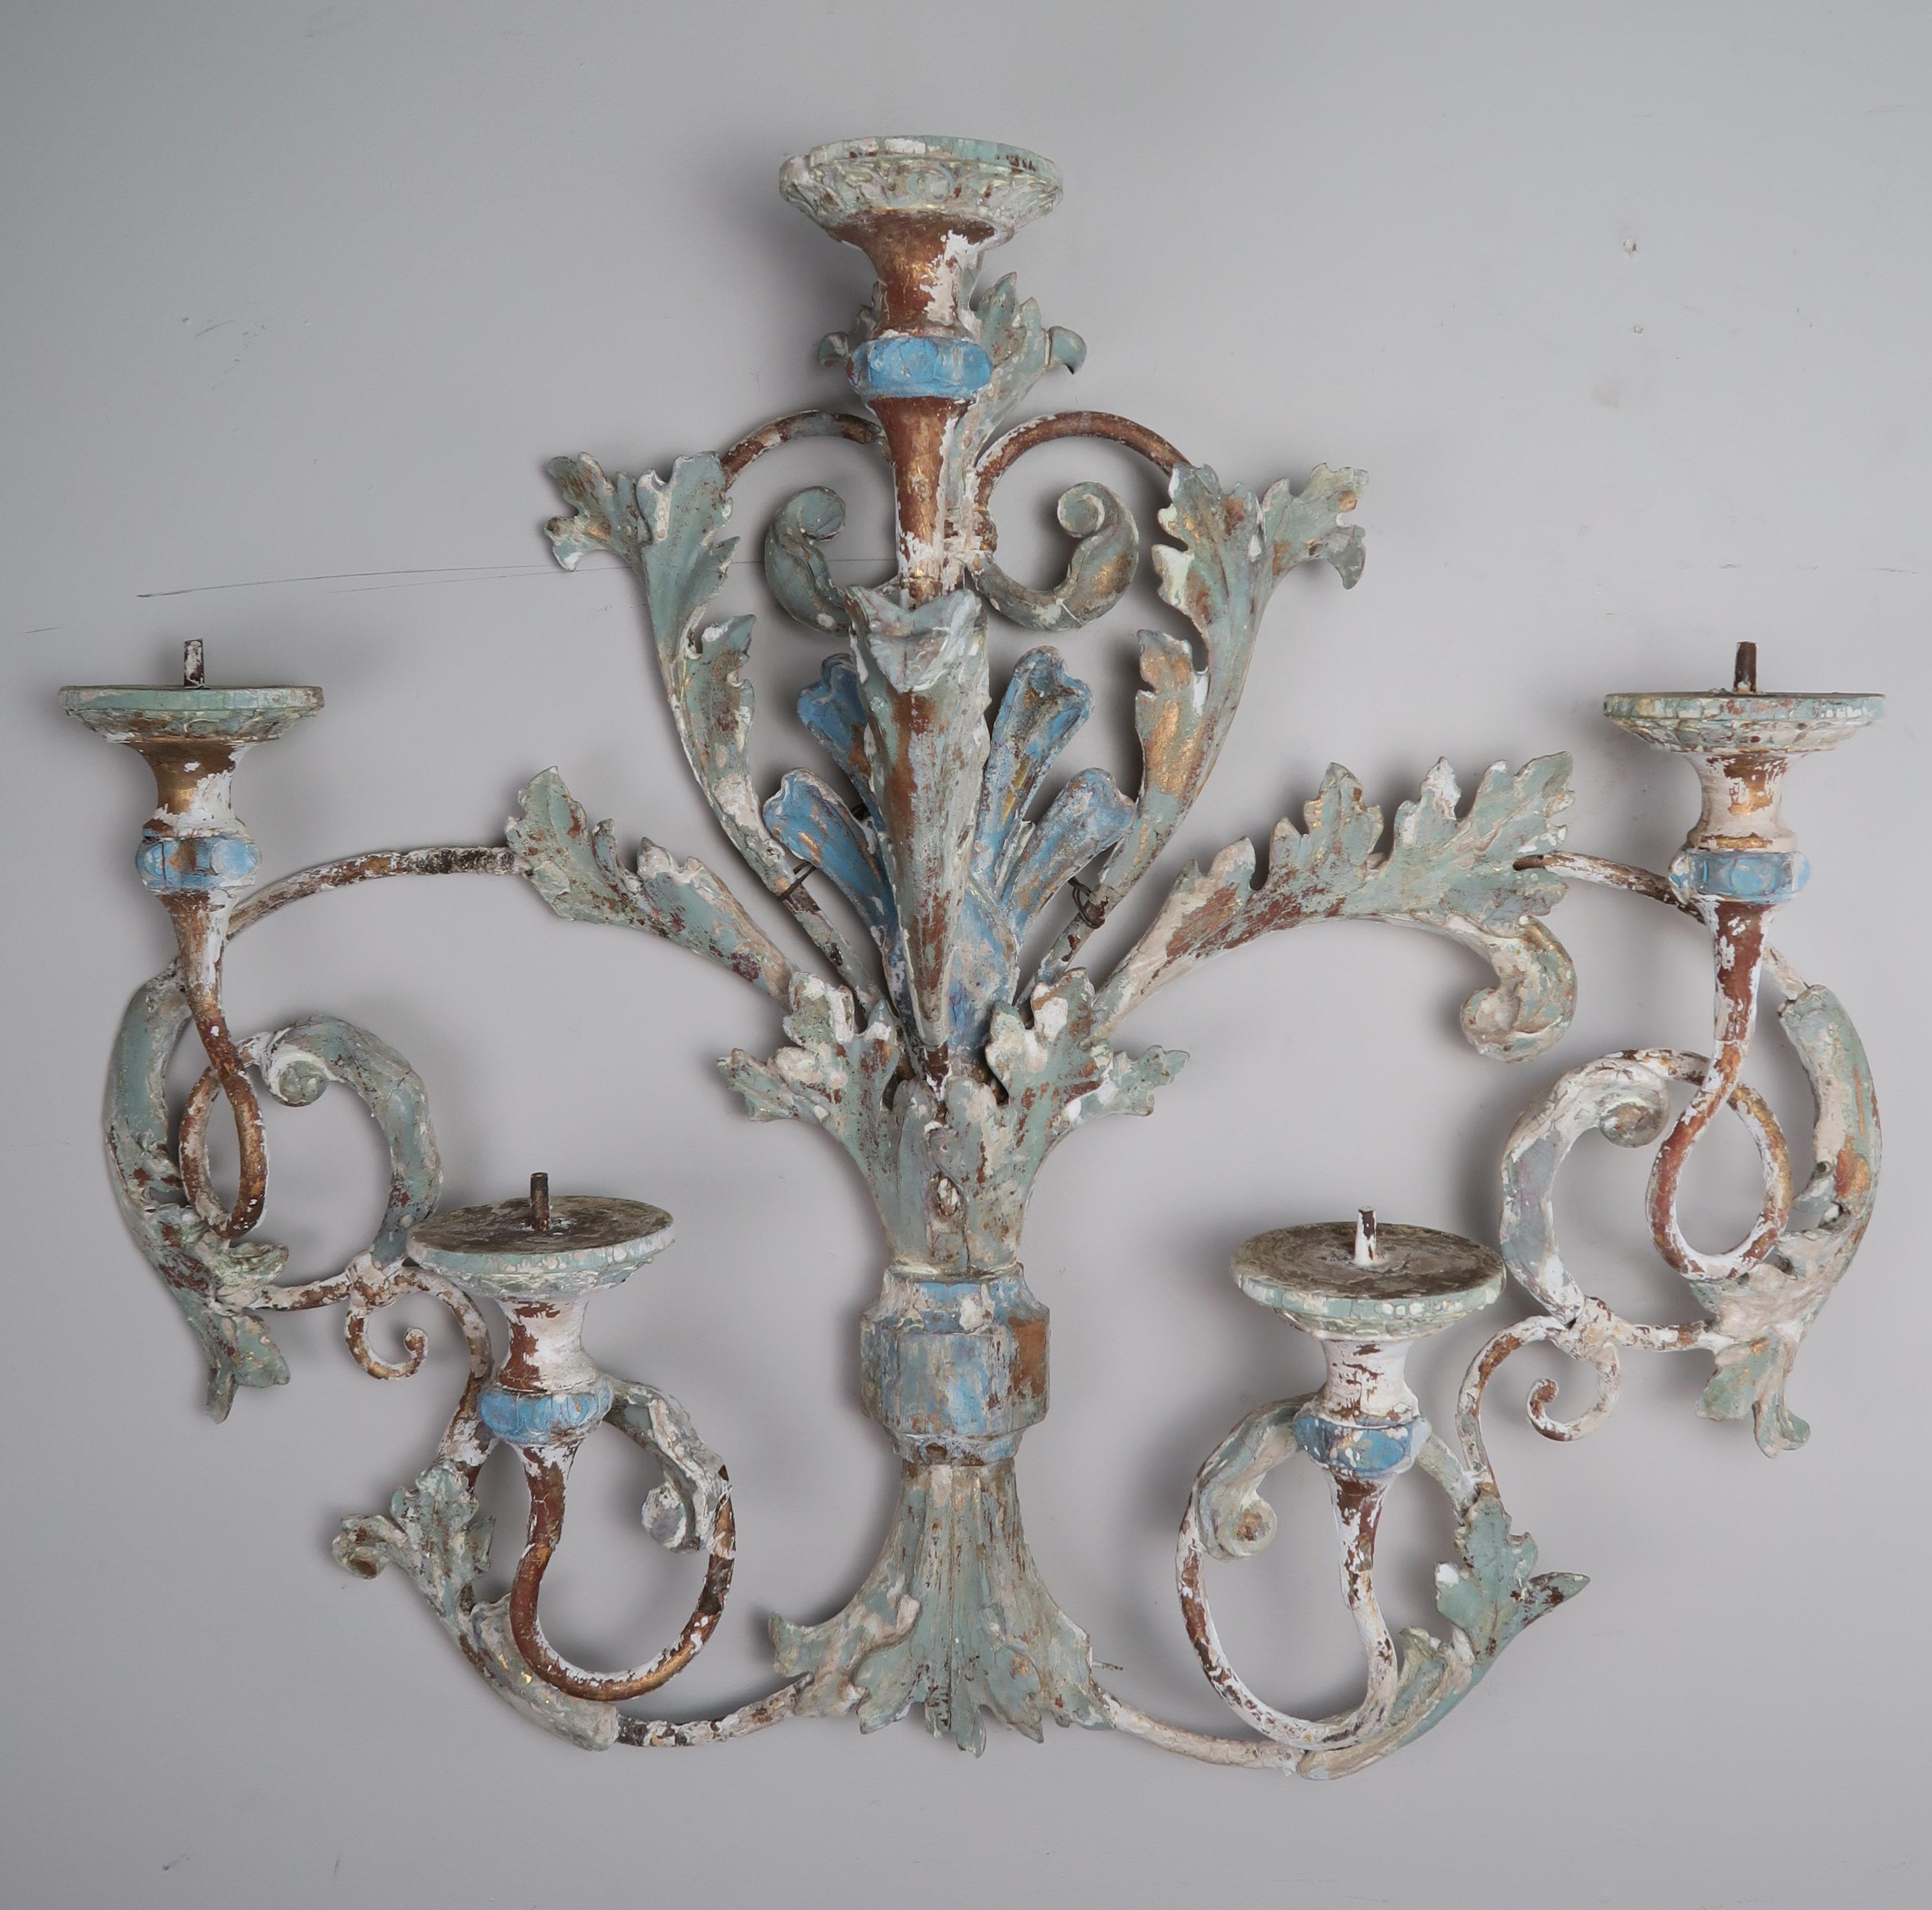 19th century French wood and iron painted carving. The carving depicts swirling acanthus leaves in soft hues of blue, green and cream colors. The paint is beautifully worn with portions of iron showing underneath.